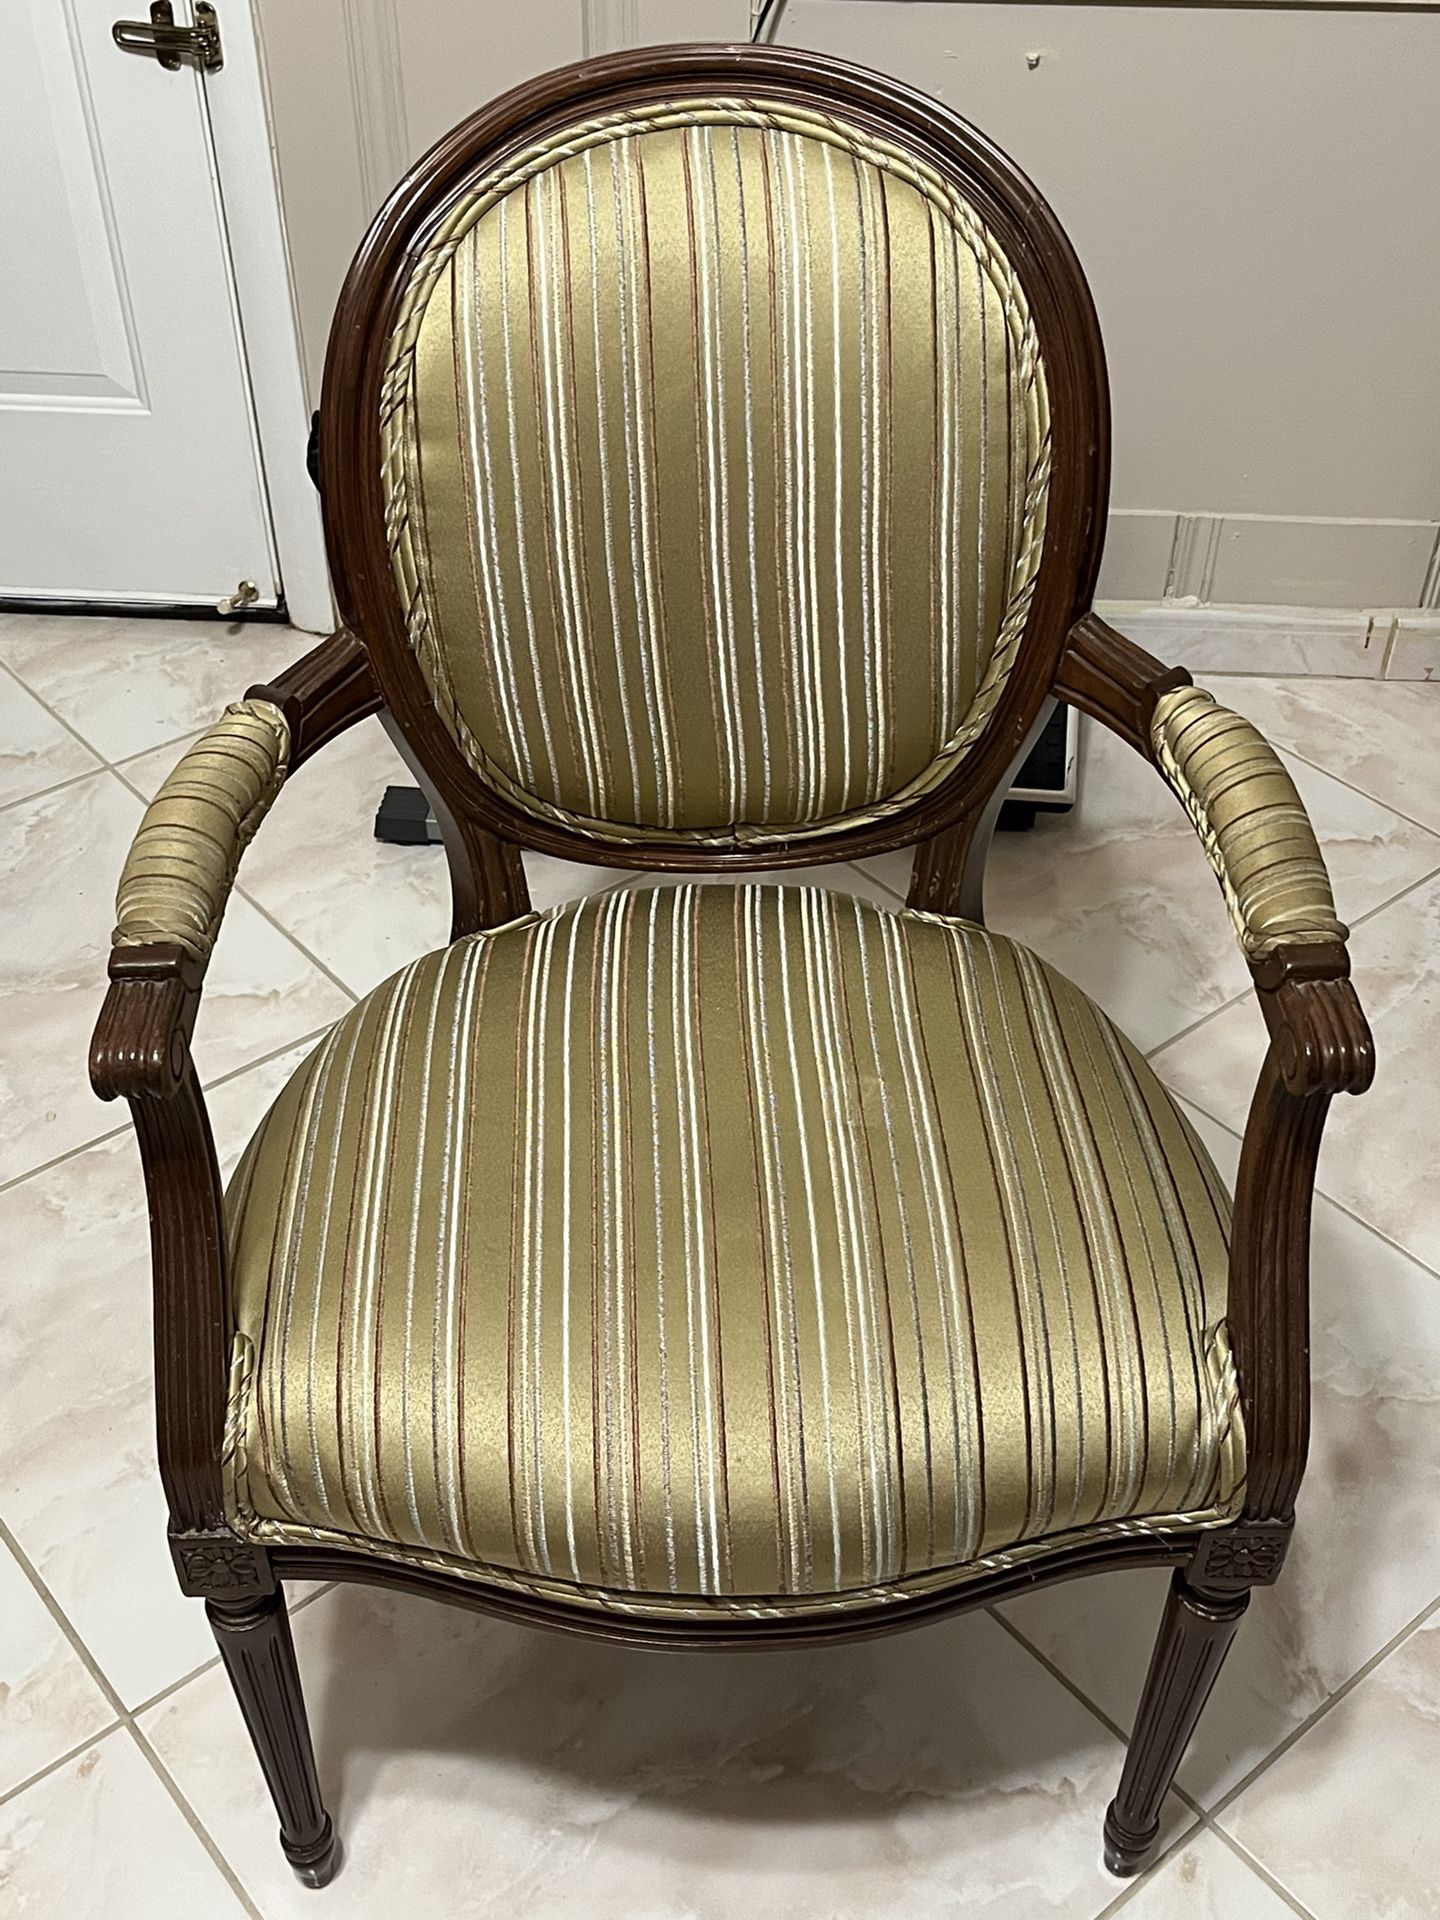 2 Antique Chairs 